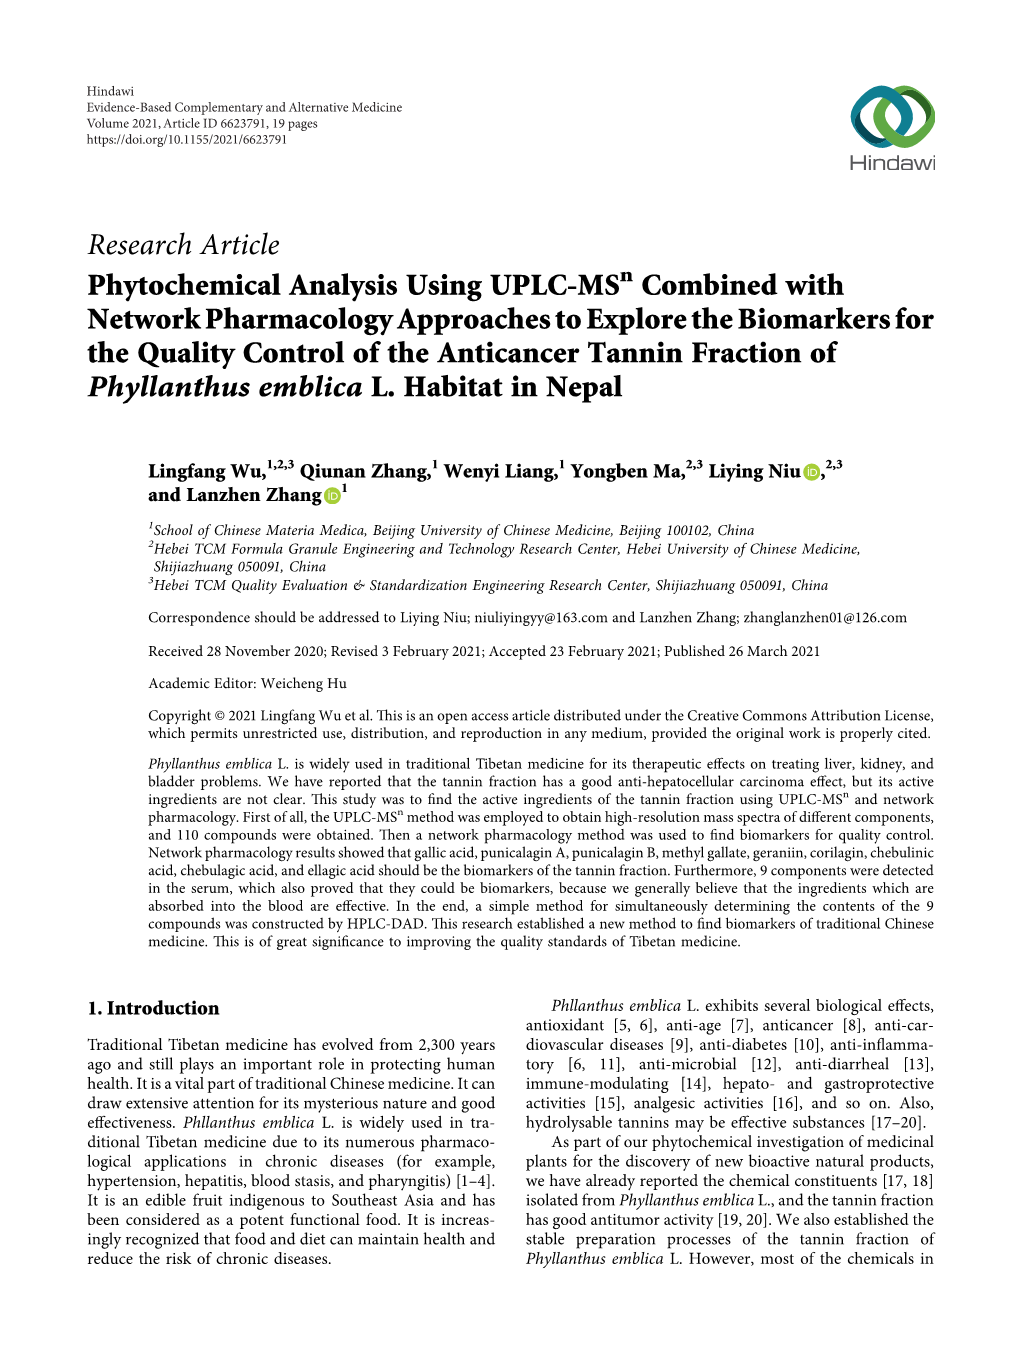 Phytochemical Analysis Using UPLC-Msn Combined with Network Pharmacology Approaches to Explore the Biomarkers for the Quality Control of the Anticancer Tannin Fraction Of